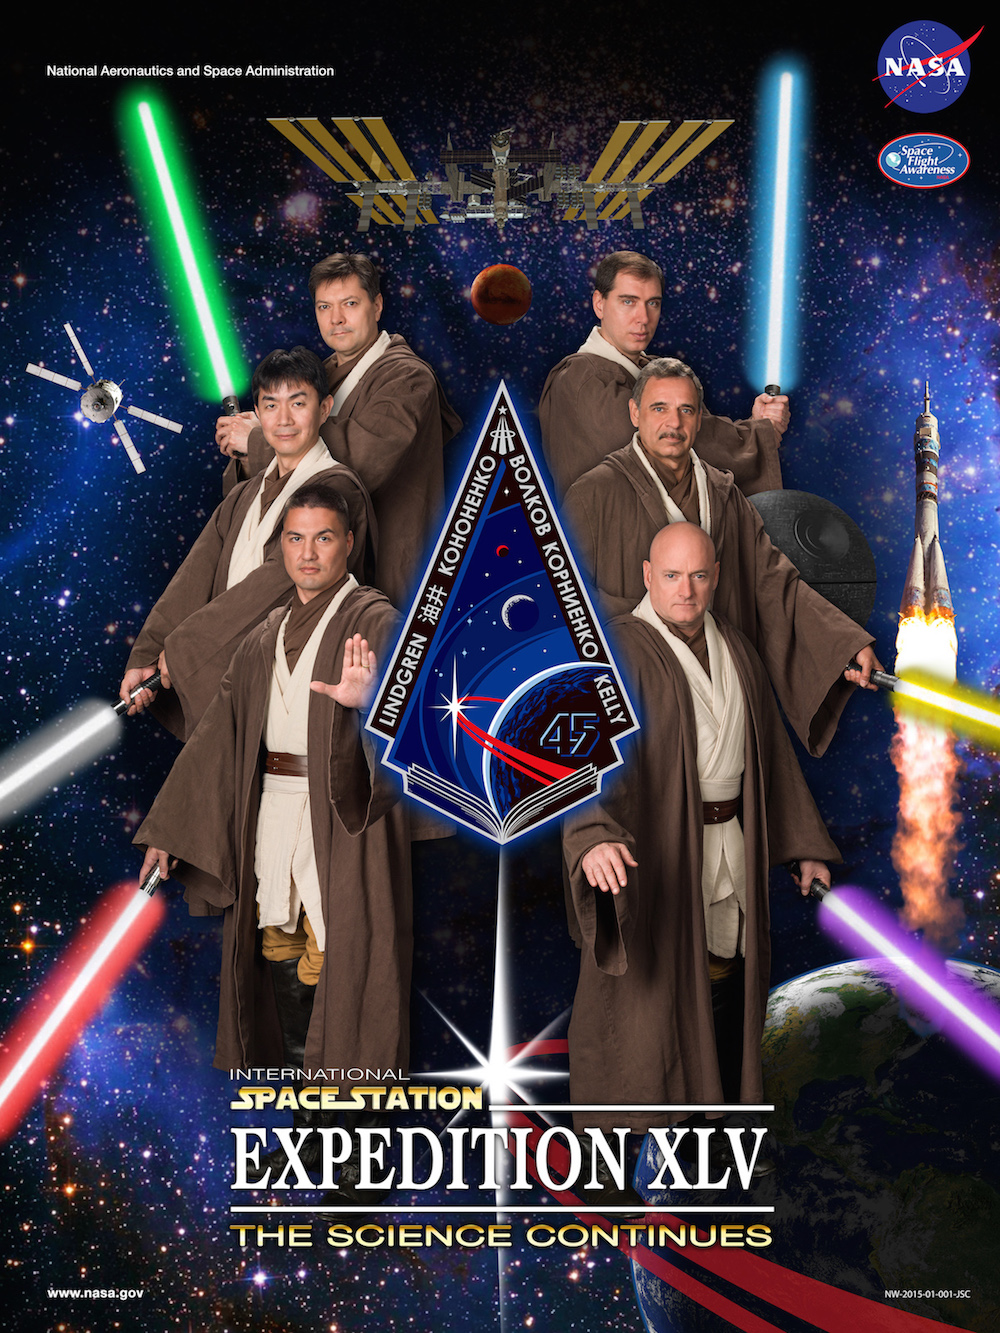 International Space Station Expedition 45 - Star Wars Crew